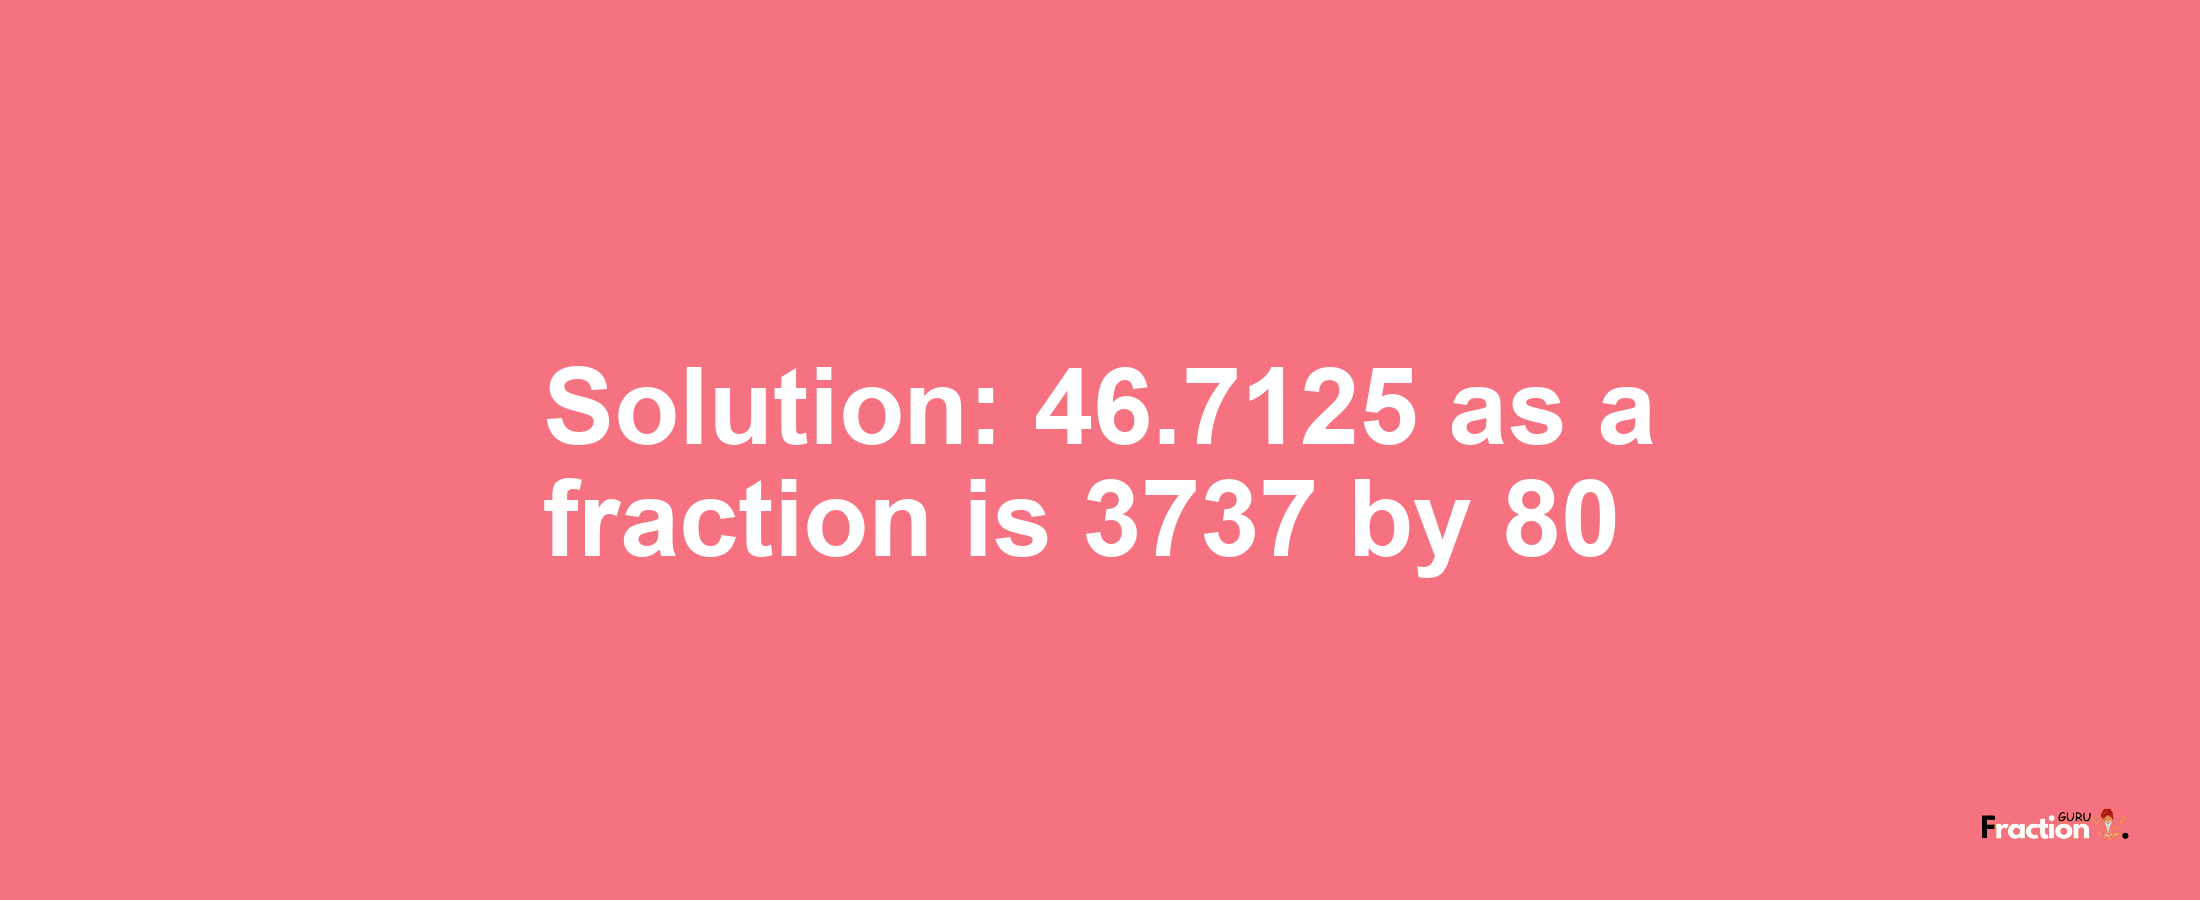 Solution:46.7125 as a fraction is 3737/80